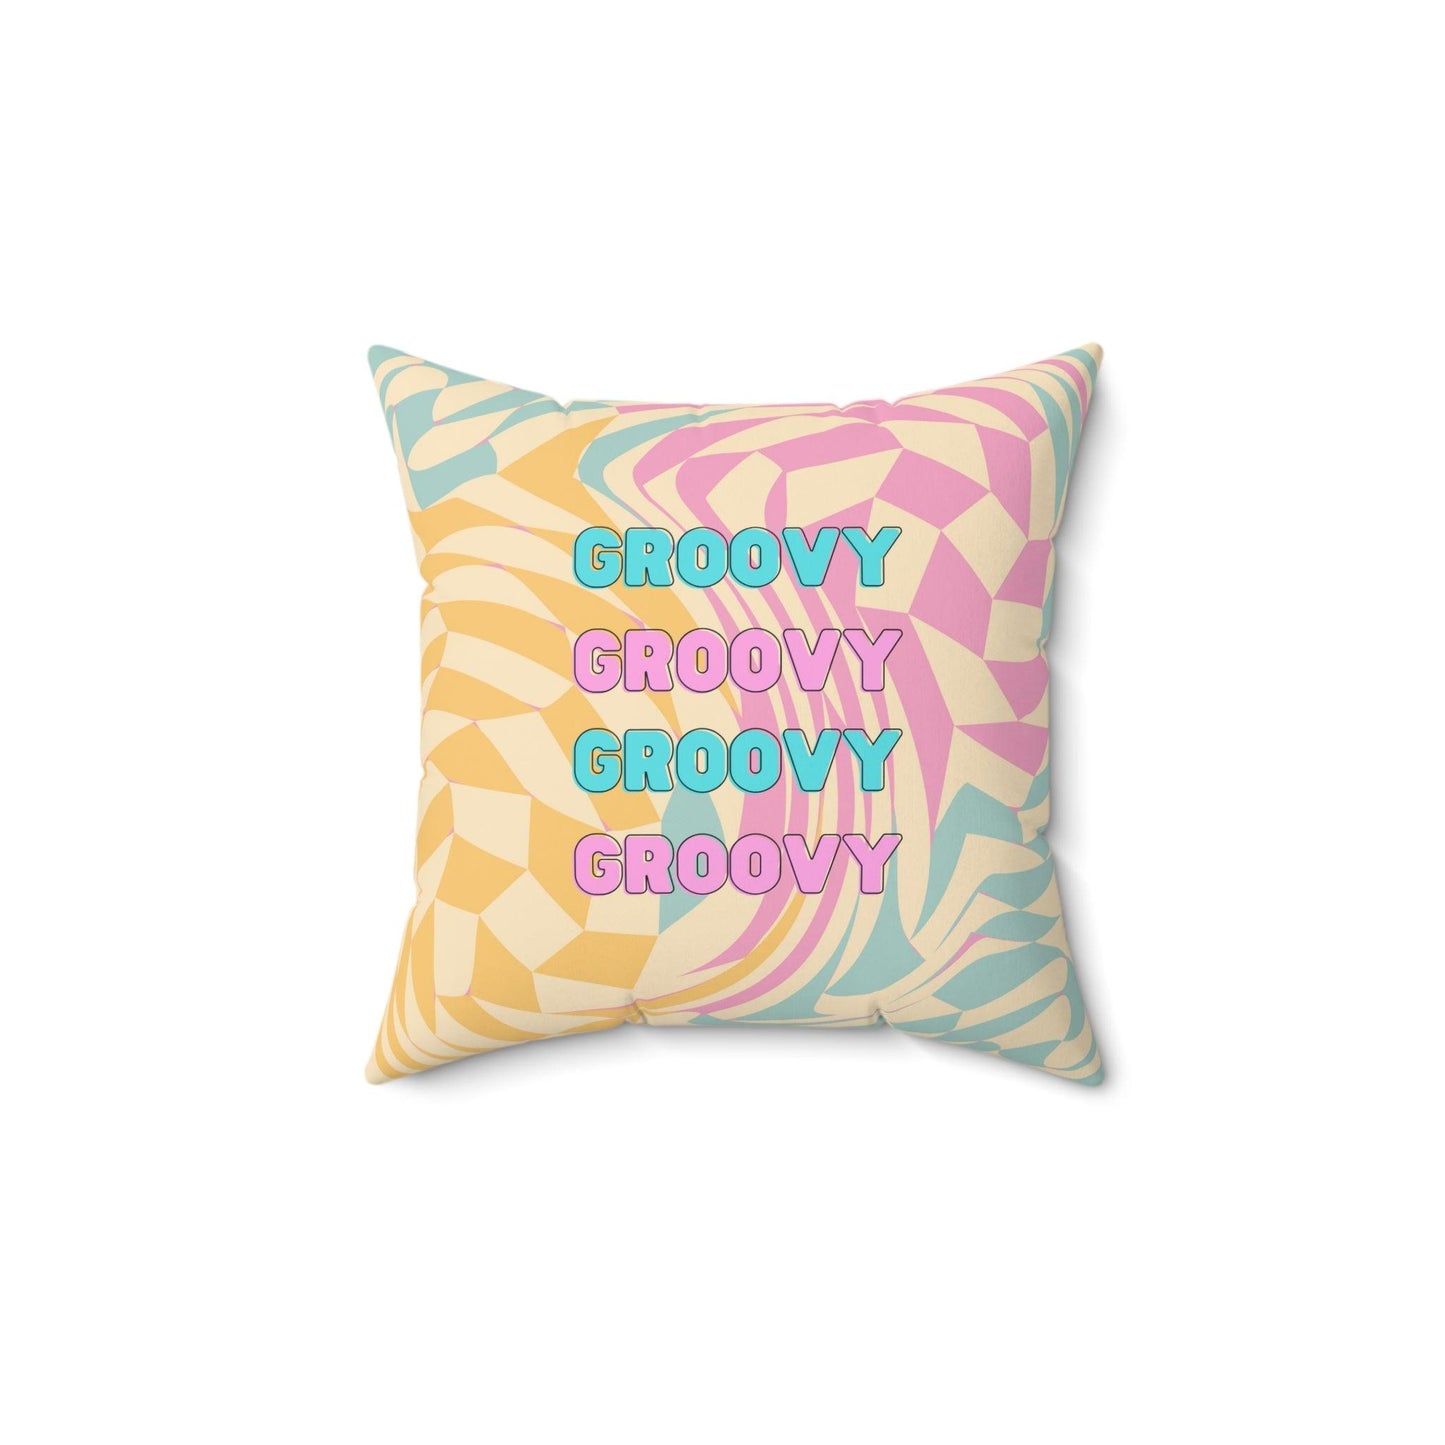 Swirly Checker Groovy Throw Pillow - MAIA HOMES